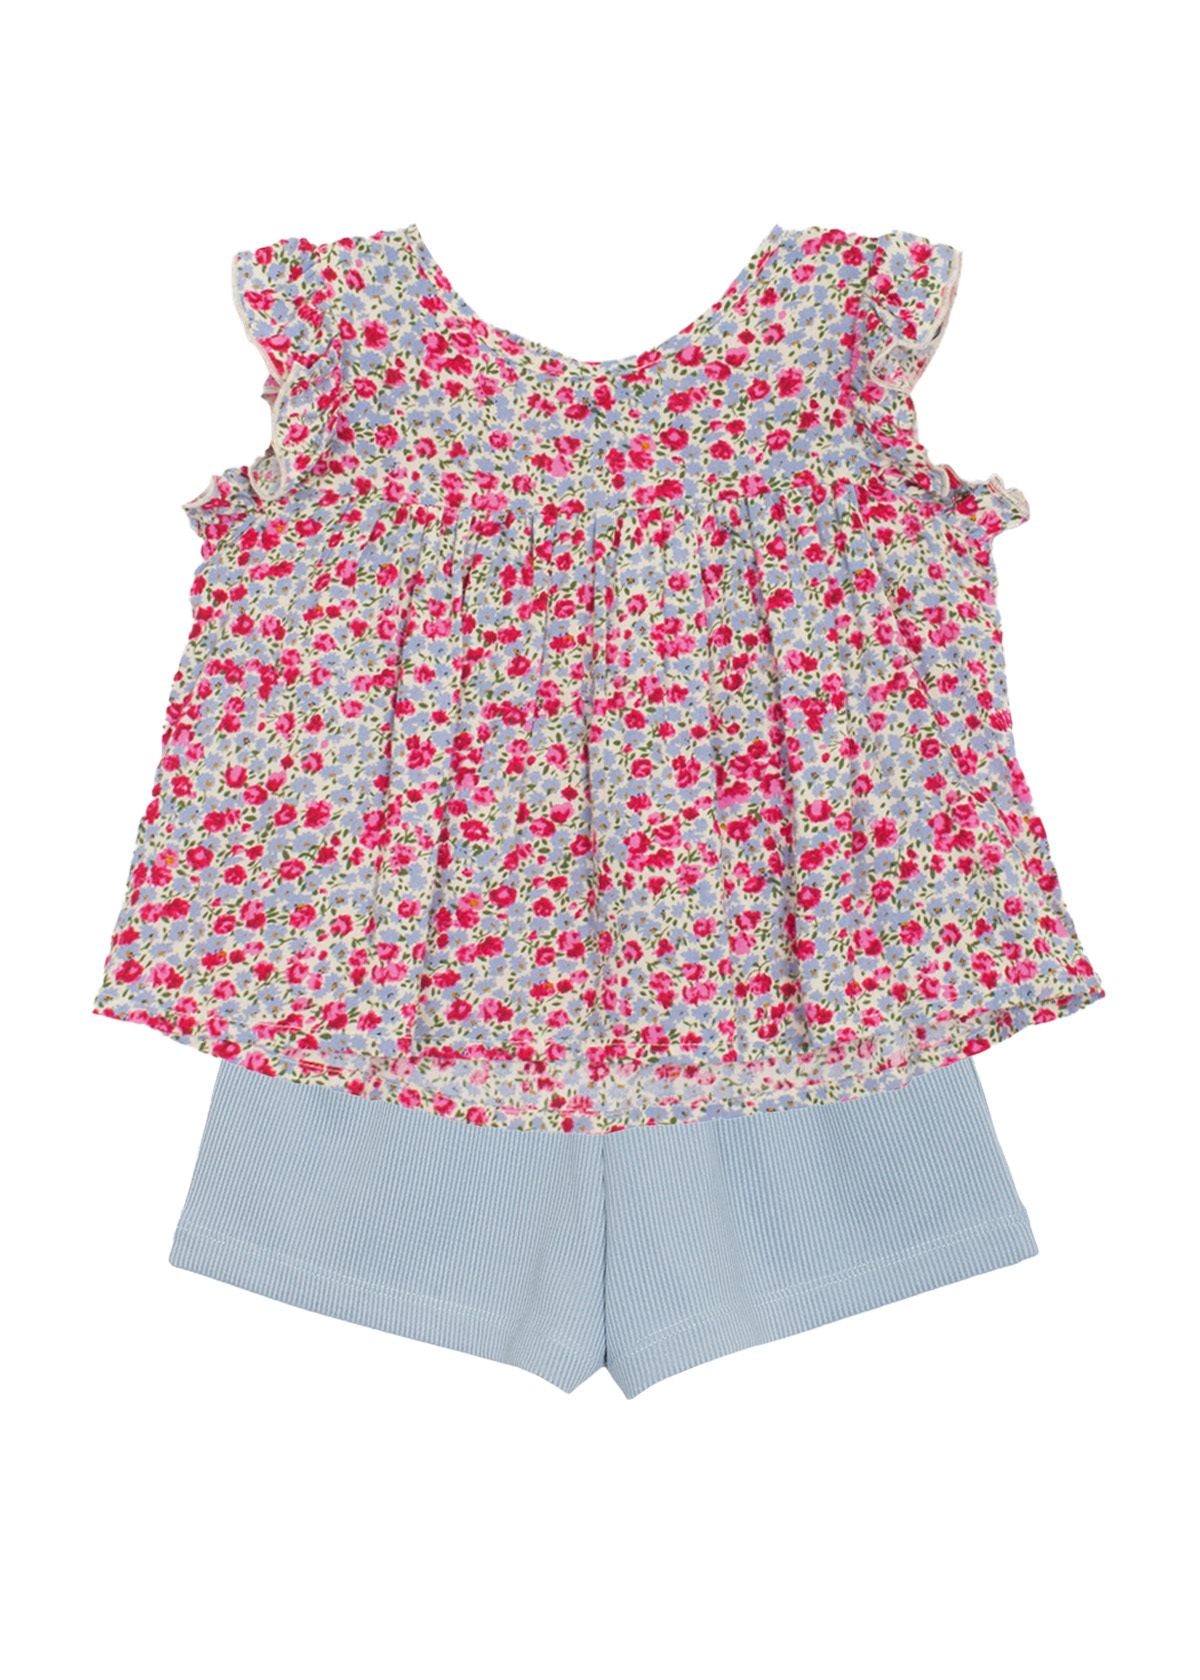 Eleanor Floral Rayon Top & Knit Short Two Piece Set